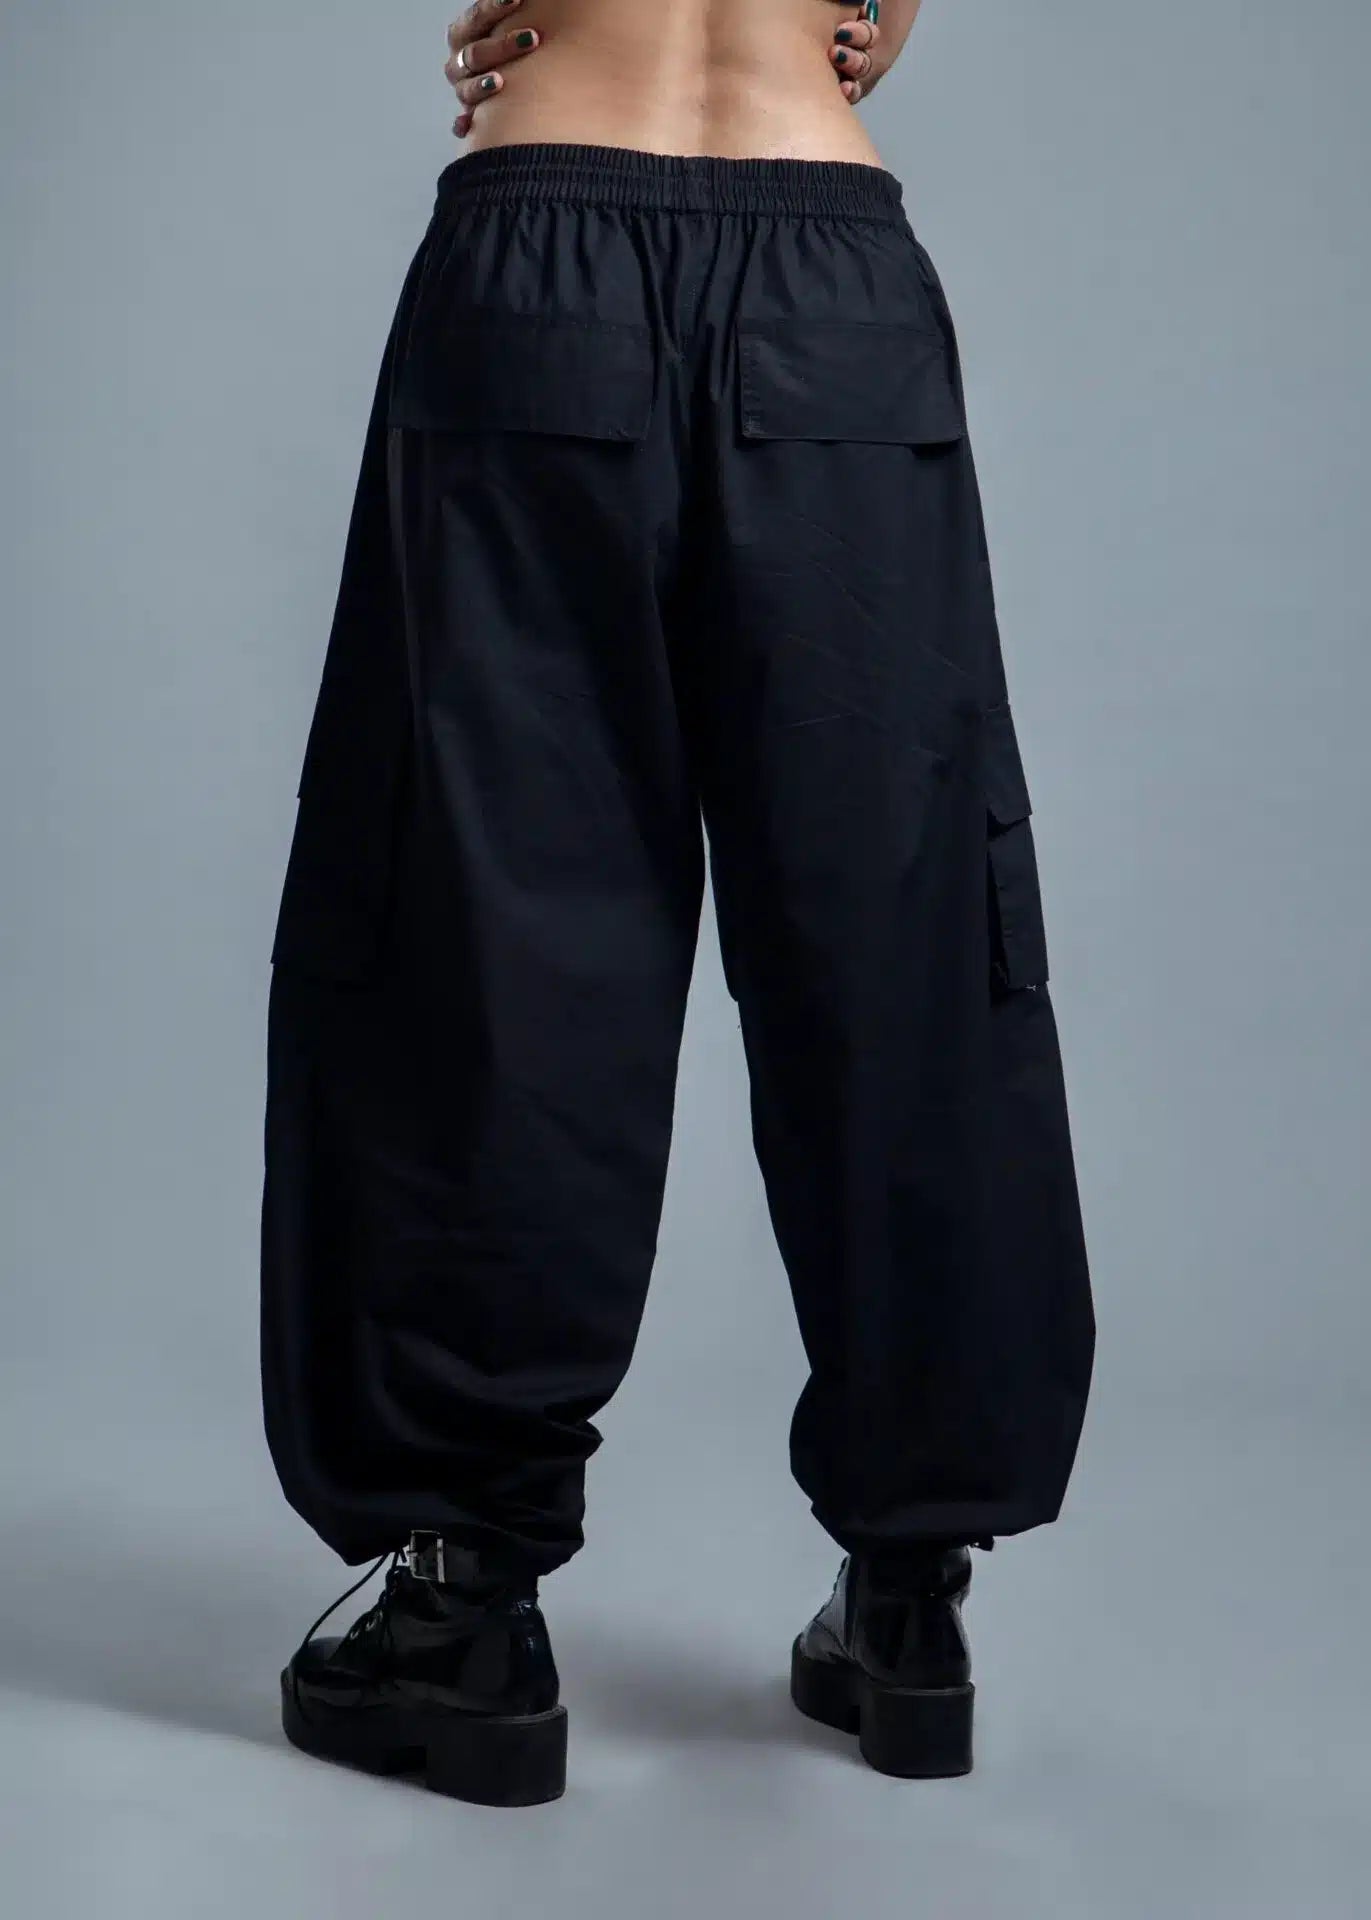 Black Relaxed Fit Cargo Pants